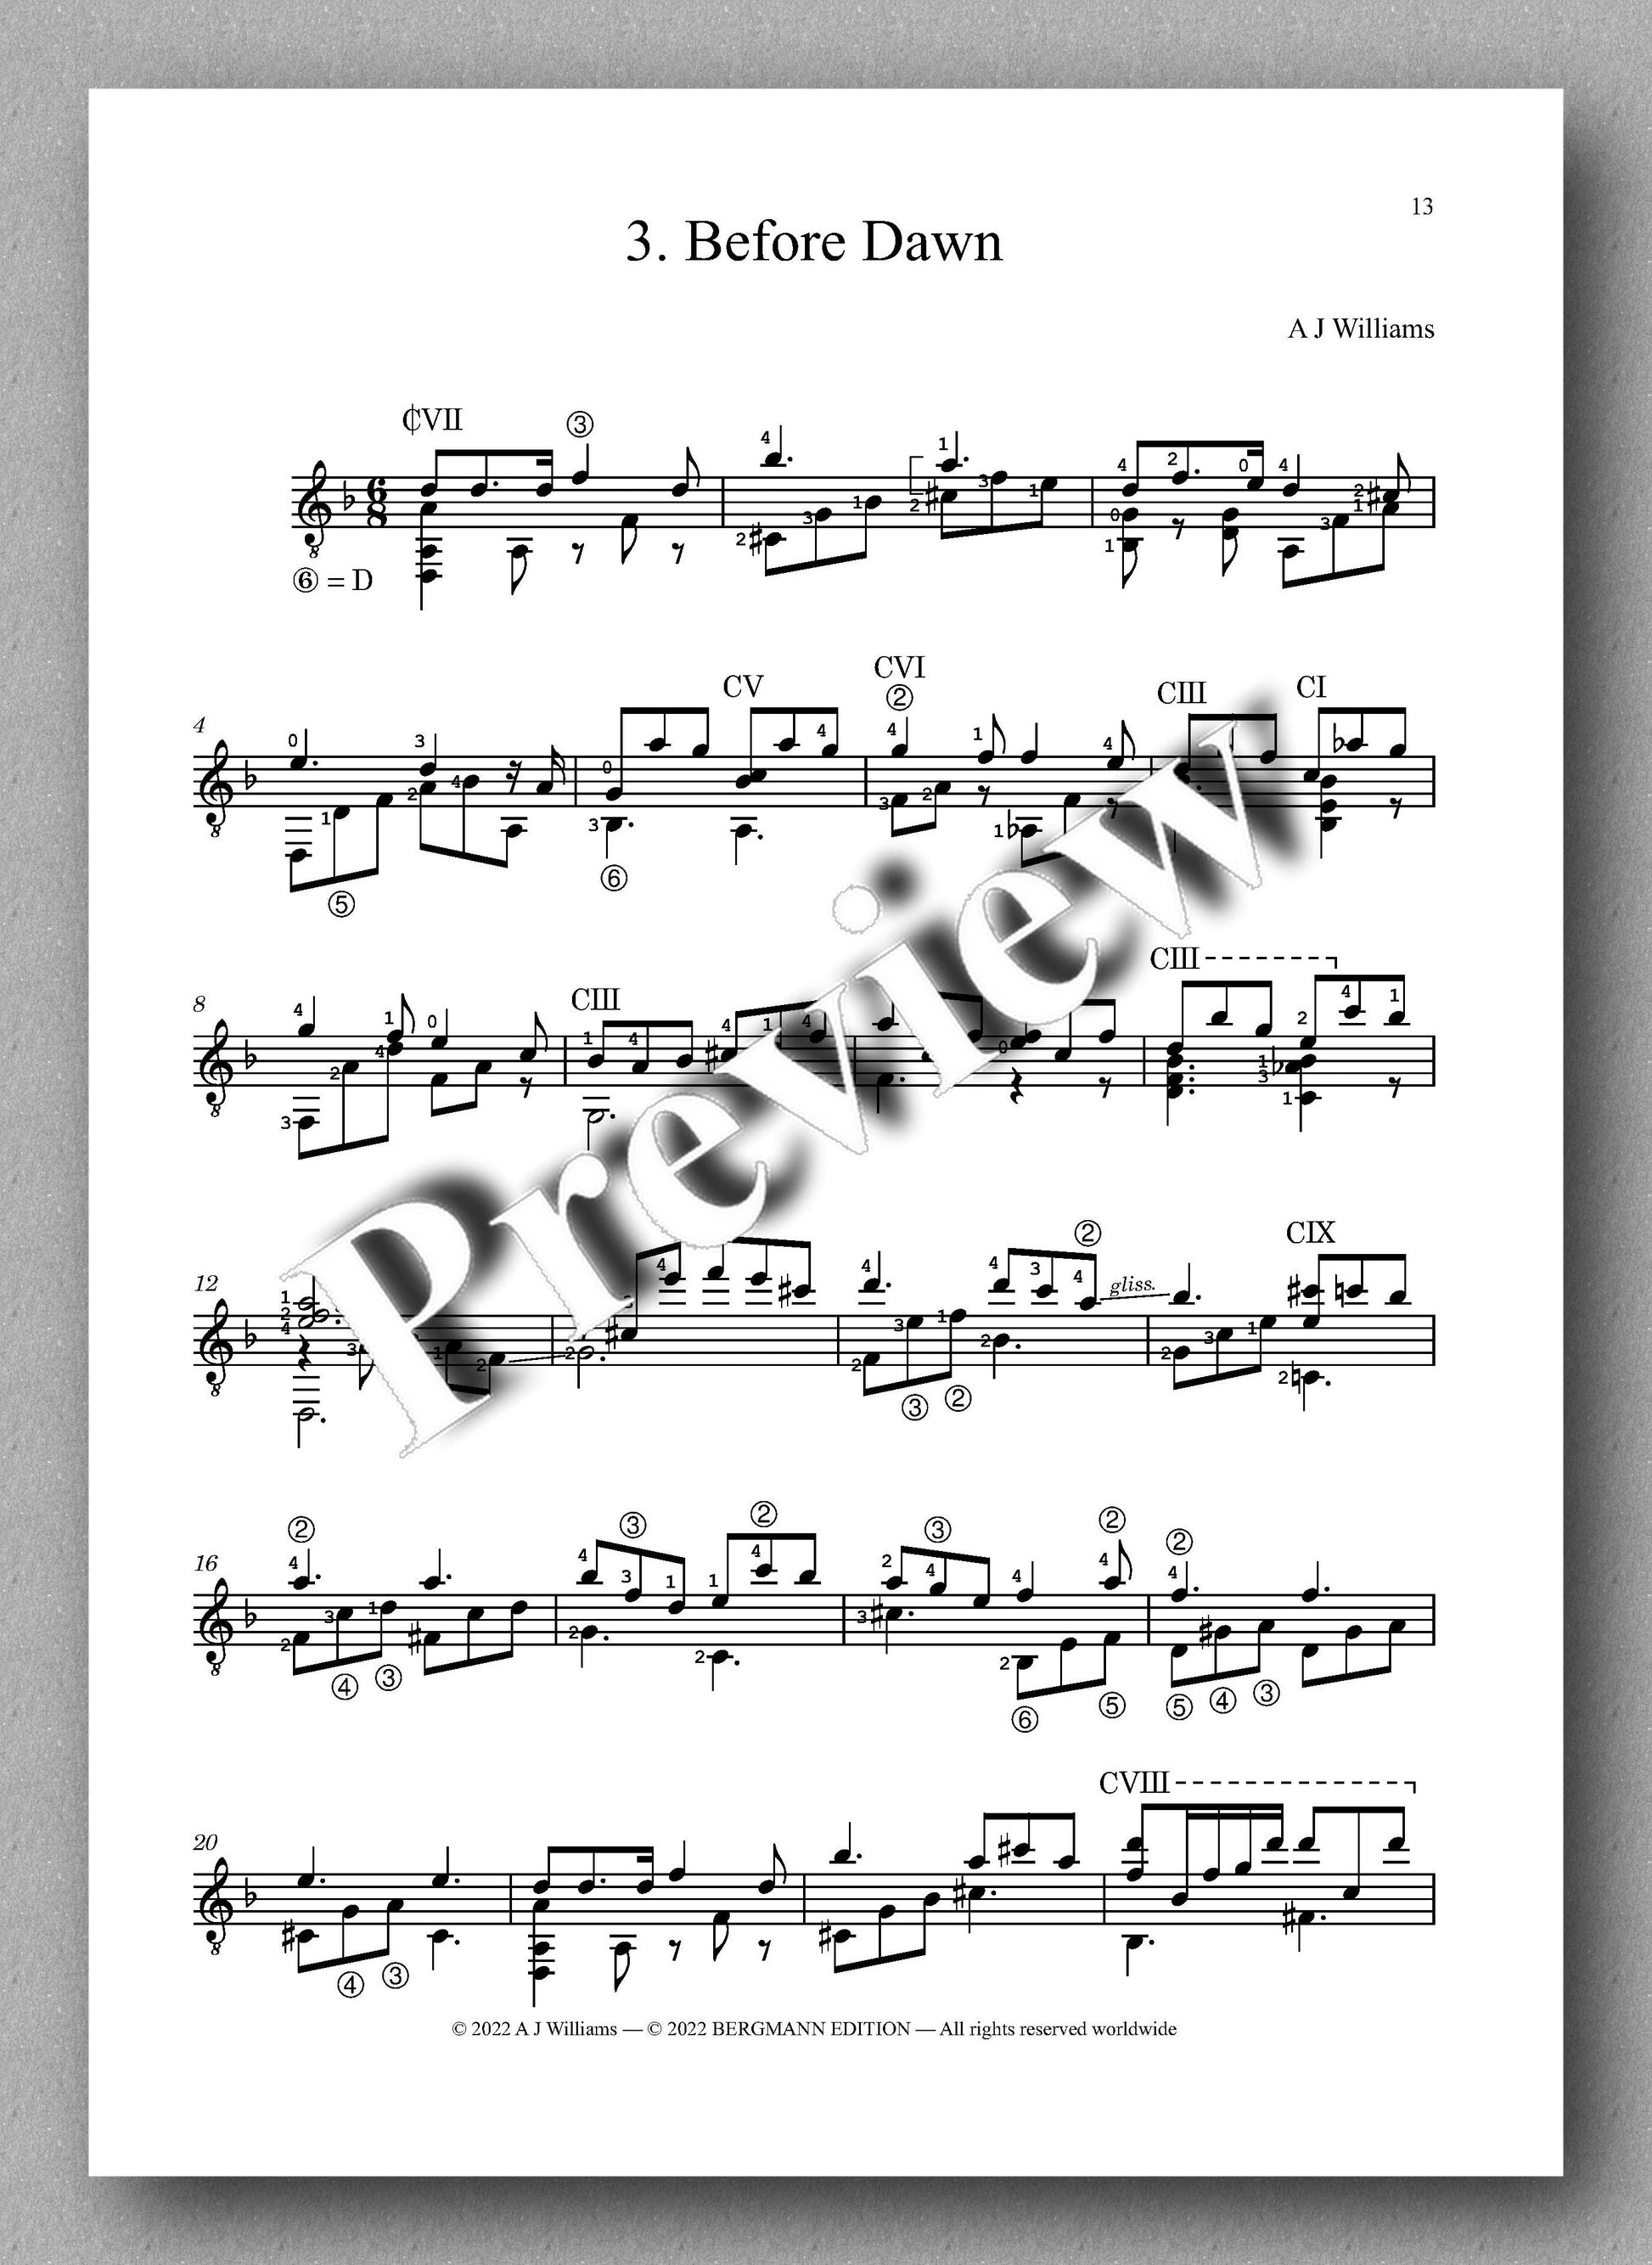 Andrew Williams, Complete Works for Solo Classical Guitar, Volume 4 - preview of the music score 2